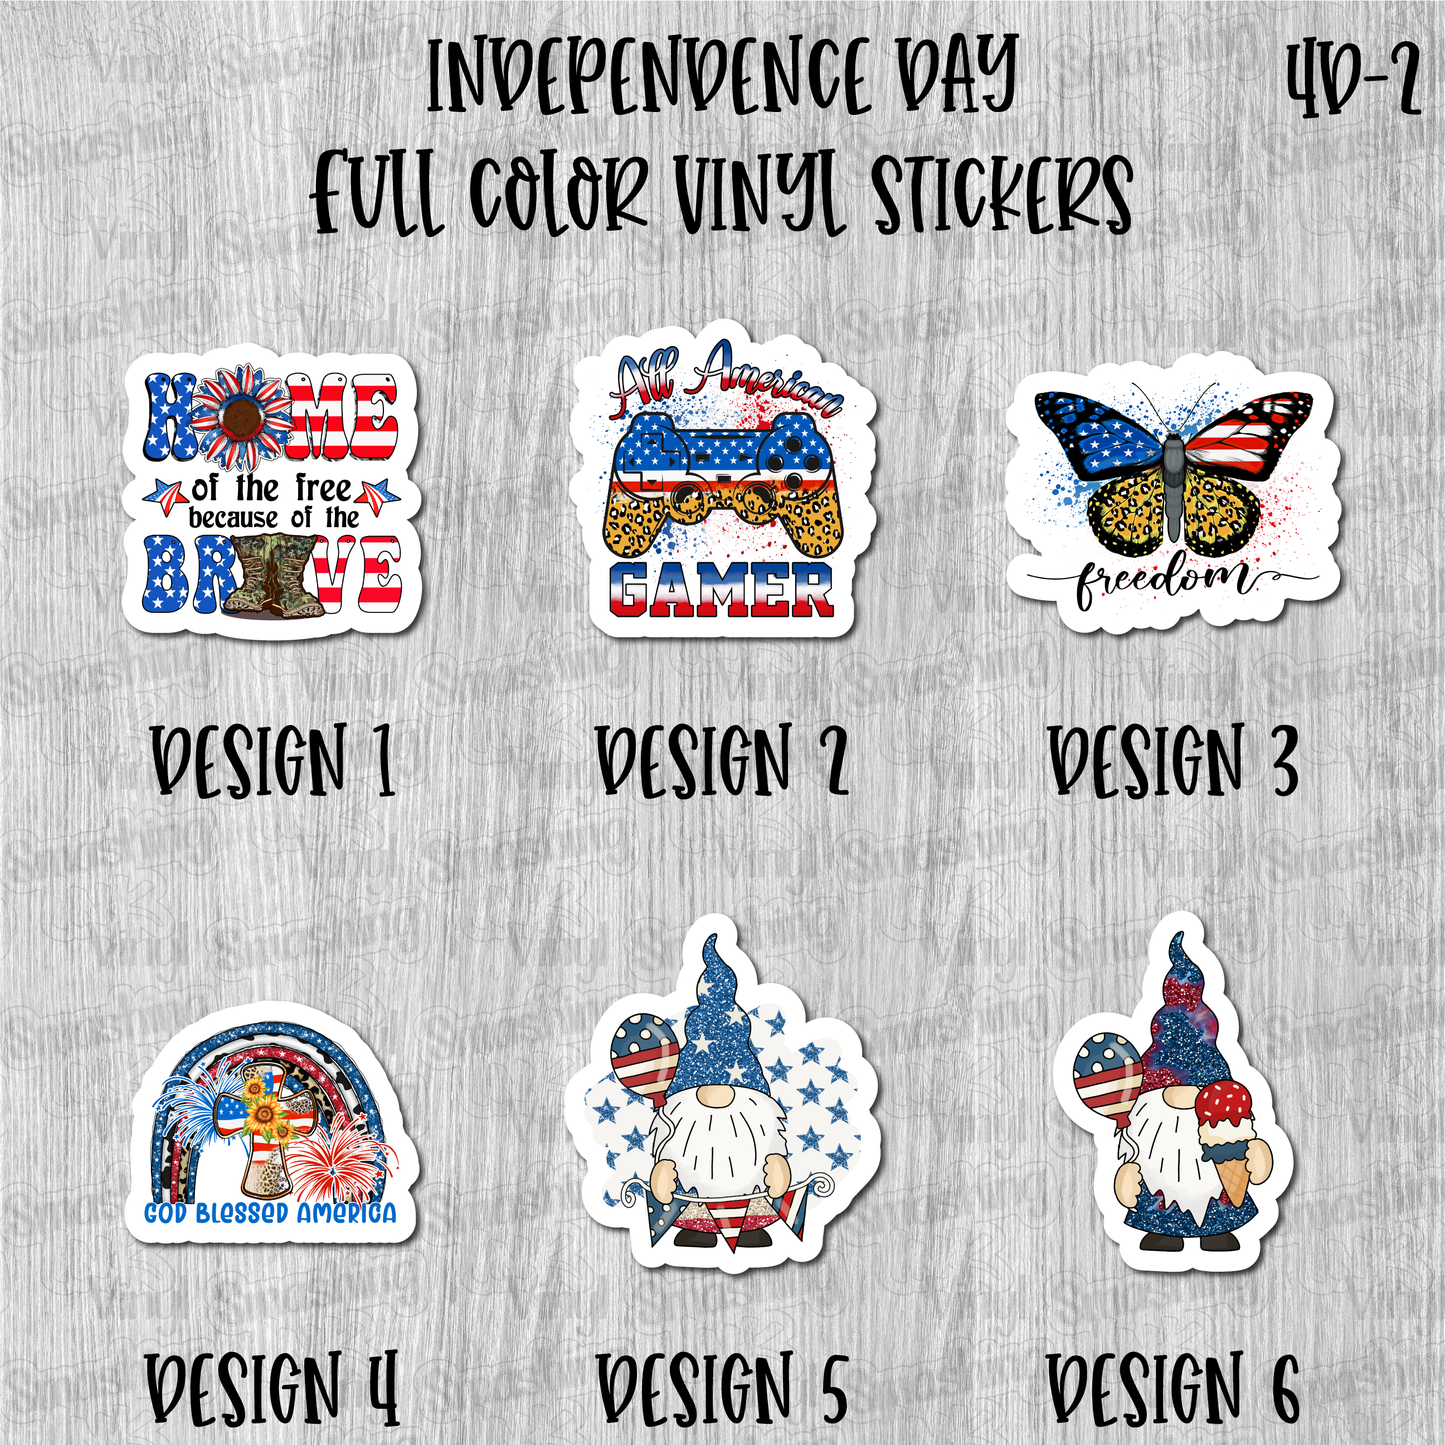 Independence Day - Full Color Vinyl Stickers (SHIPS IN 3-7 BUS DAYS)